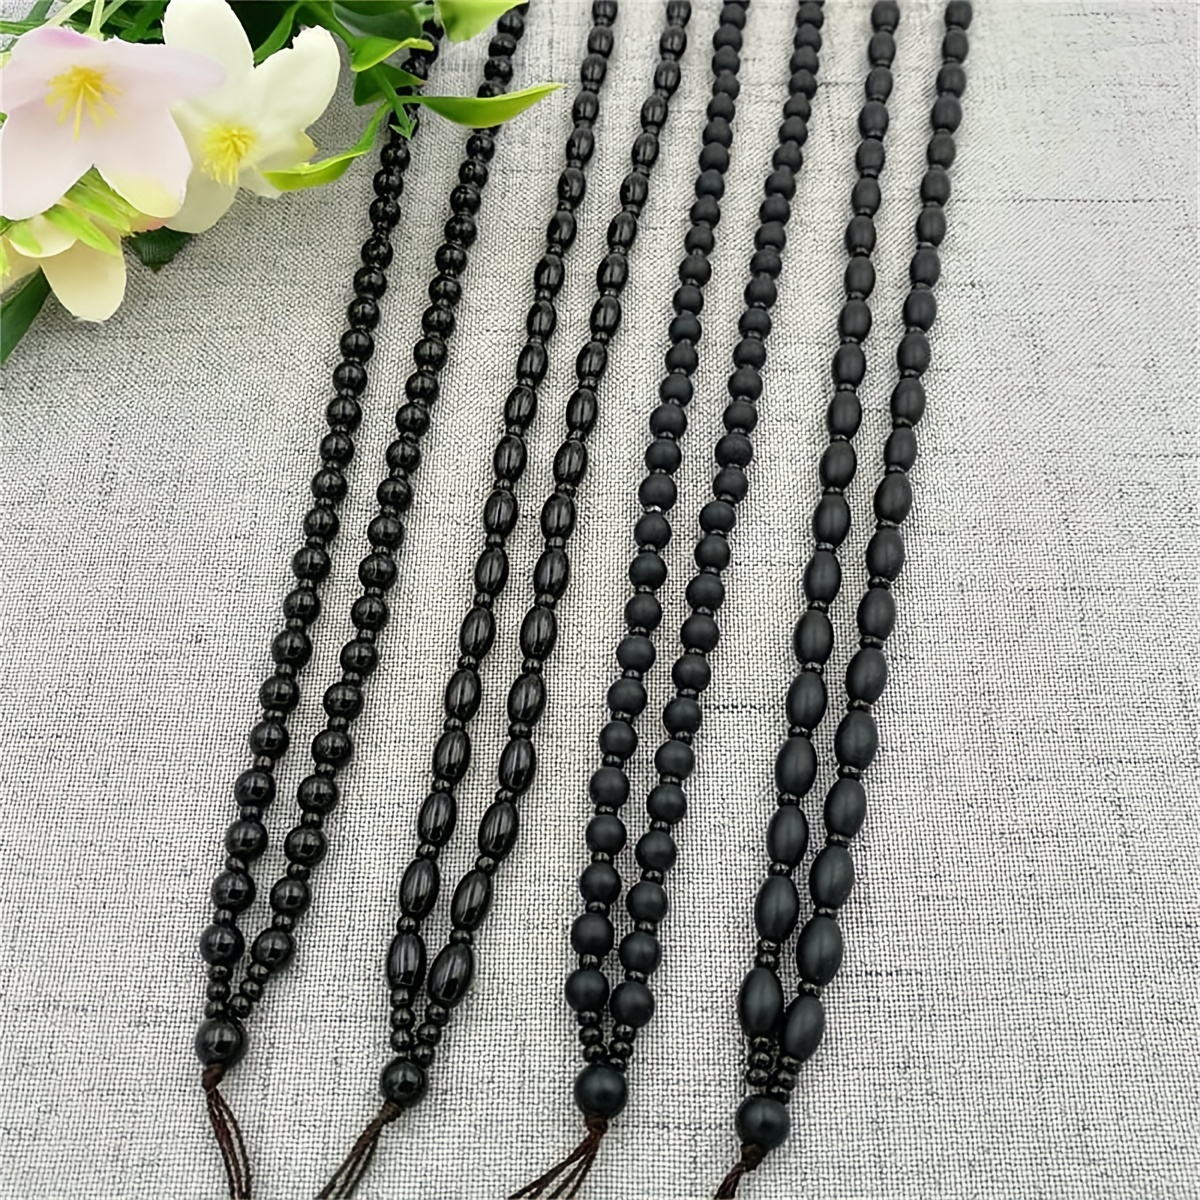 1pc Exquisite 108 Mala Bead Necklace, Yoga Mala Meditation Beads Jewelry  Prayer Necklaces For Men